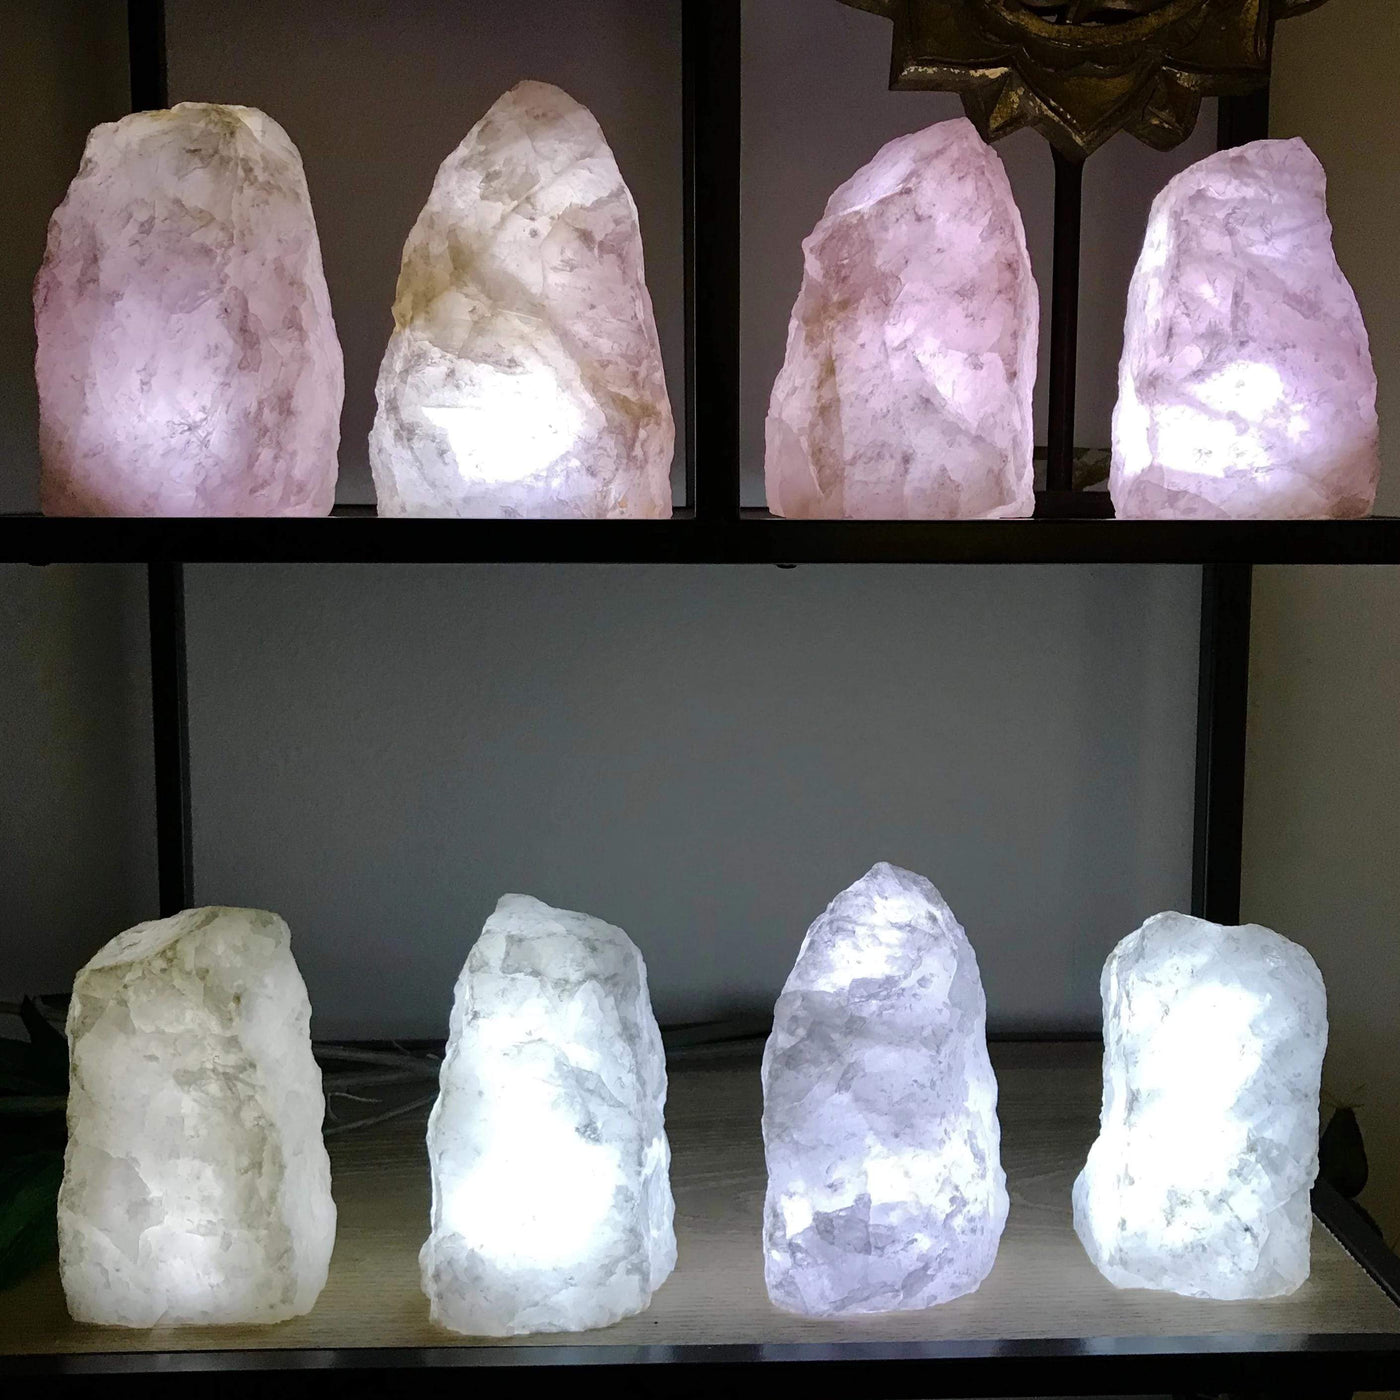 8 Rough Stone Lamps in groups of 4 lit up in a dark room